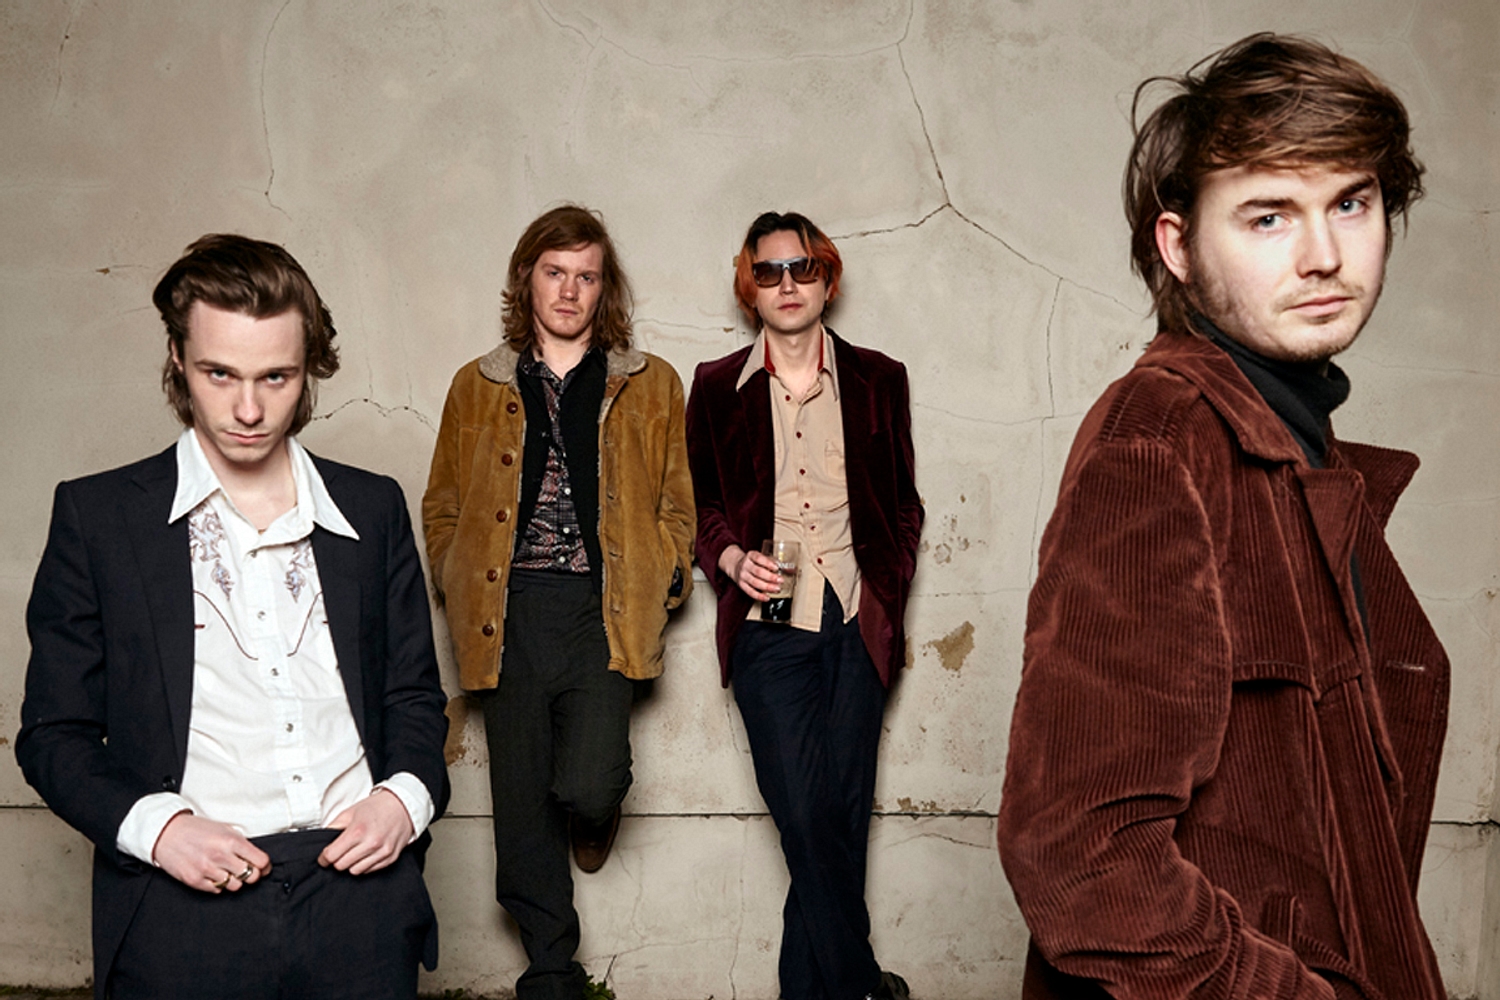 Palma Violets: “Hopefully we can actually tour the album properly”